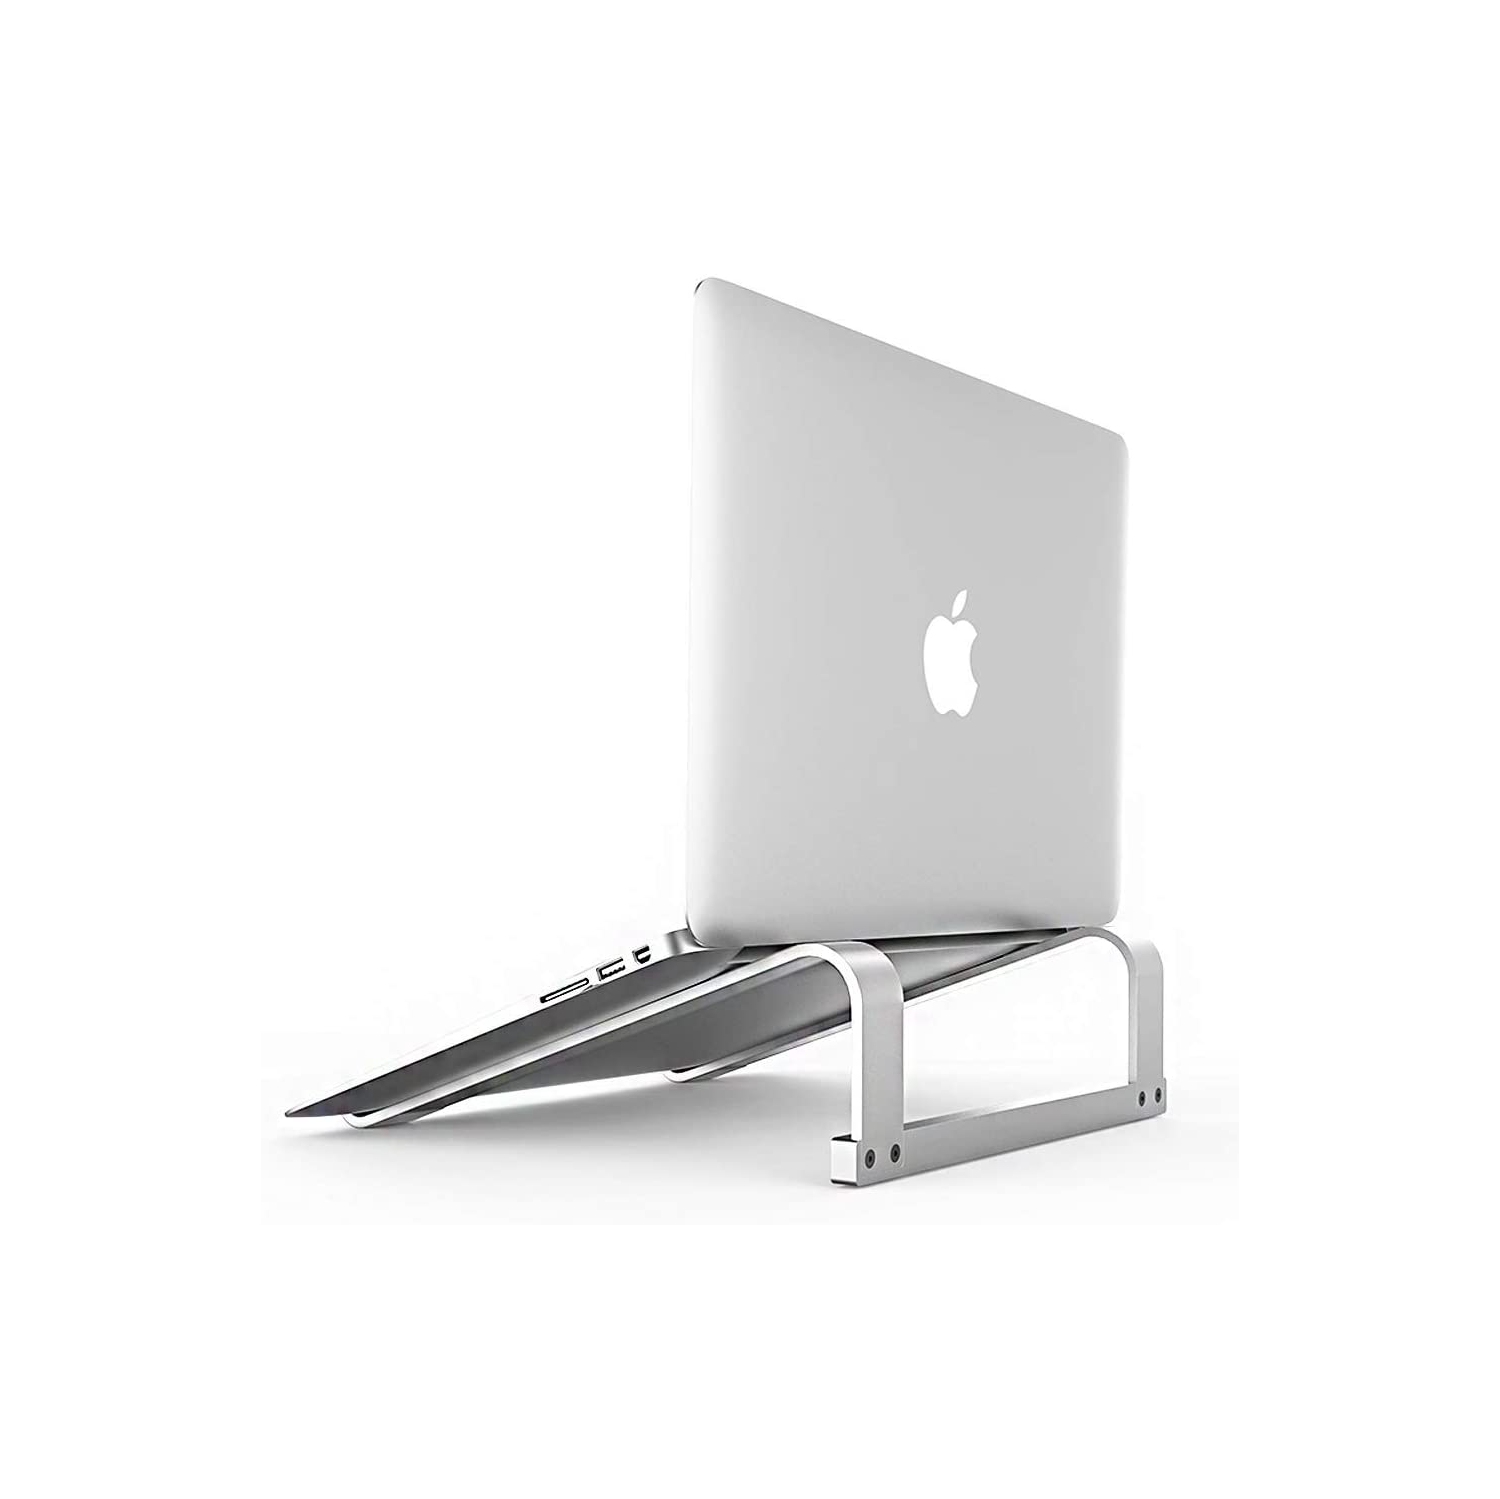 Laptop Stand for Desk,Stable MacBook Pro Stand,Ergonomic Aluminum Computer Riser for 12 13 15 16 17 inch ,Computer Cooling Stand for Mac MacBook Pro Air,HP, Dell, More PC Notebook(